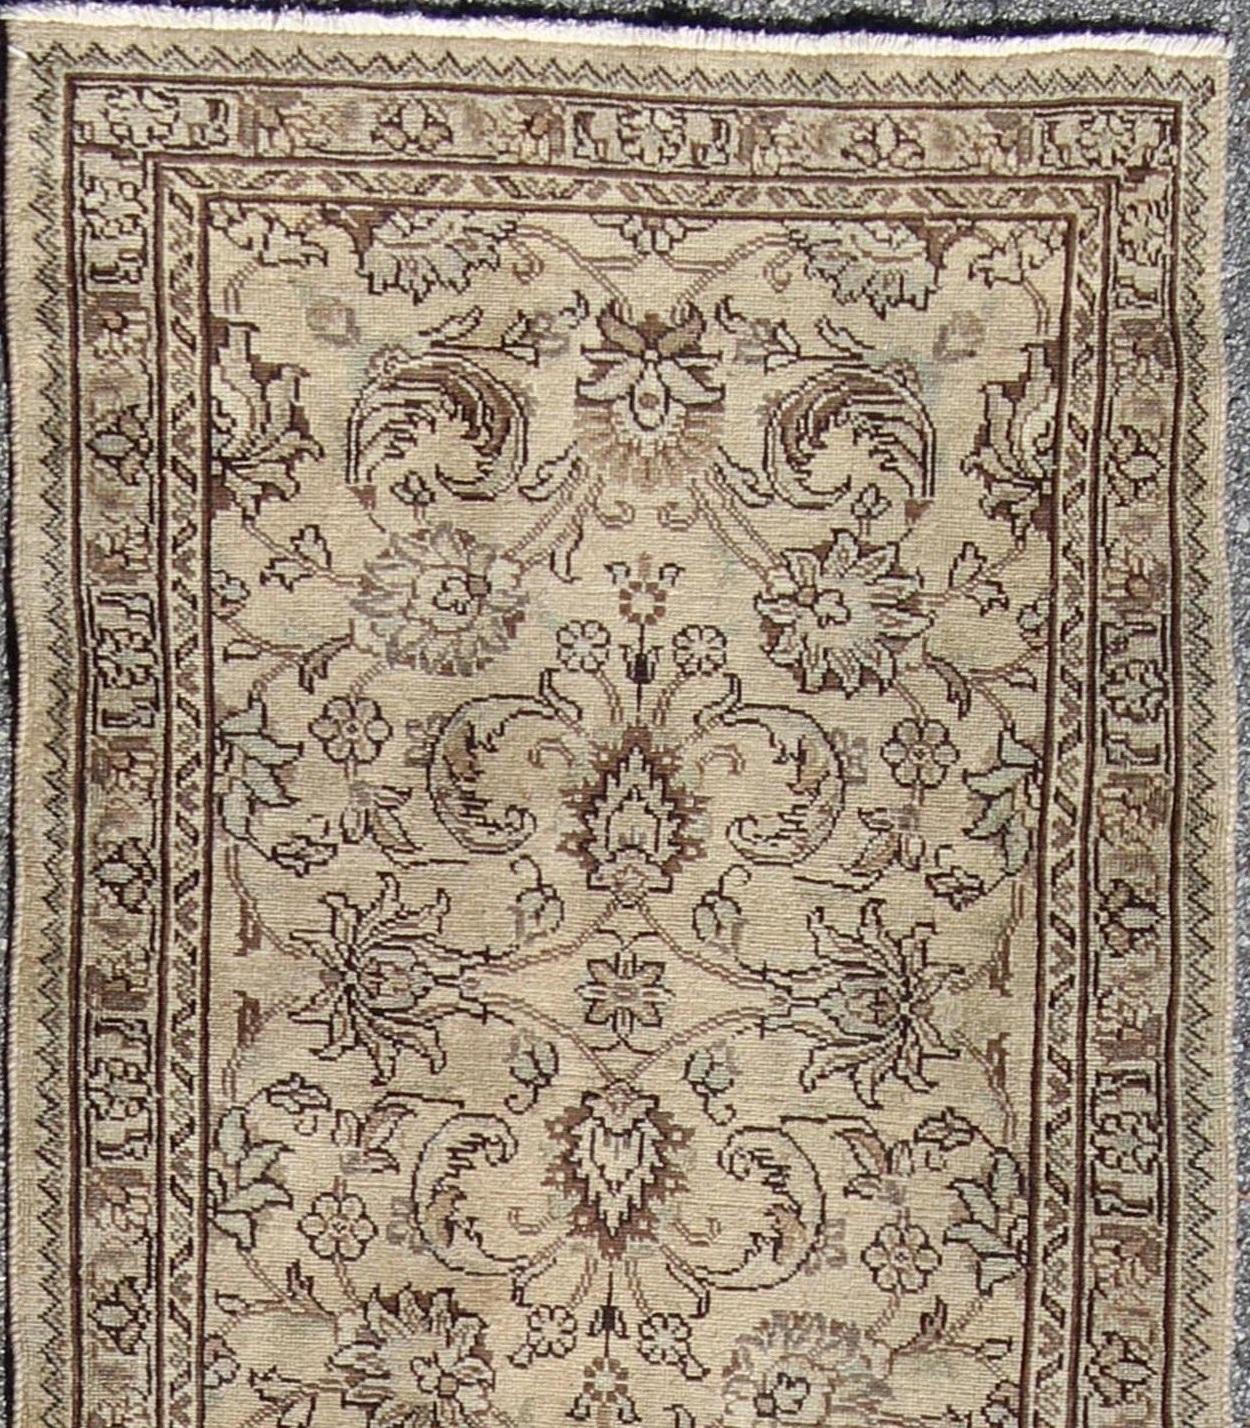 Brown and nude, natural colored vintage Persian Tabriz runner with all-over floral design, rug h-102-15, country of origin / type: Iran / Tabriz, circa 1950

This antique Persian runner with a sophisticated, all-over design features a natural